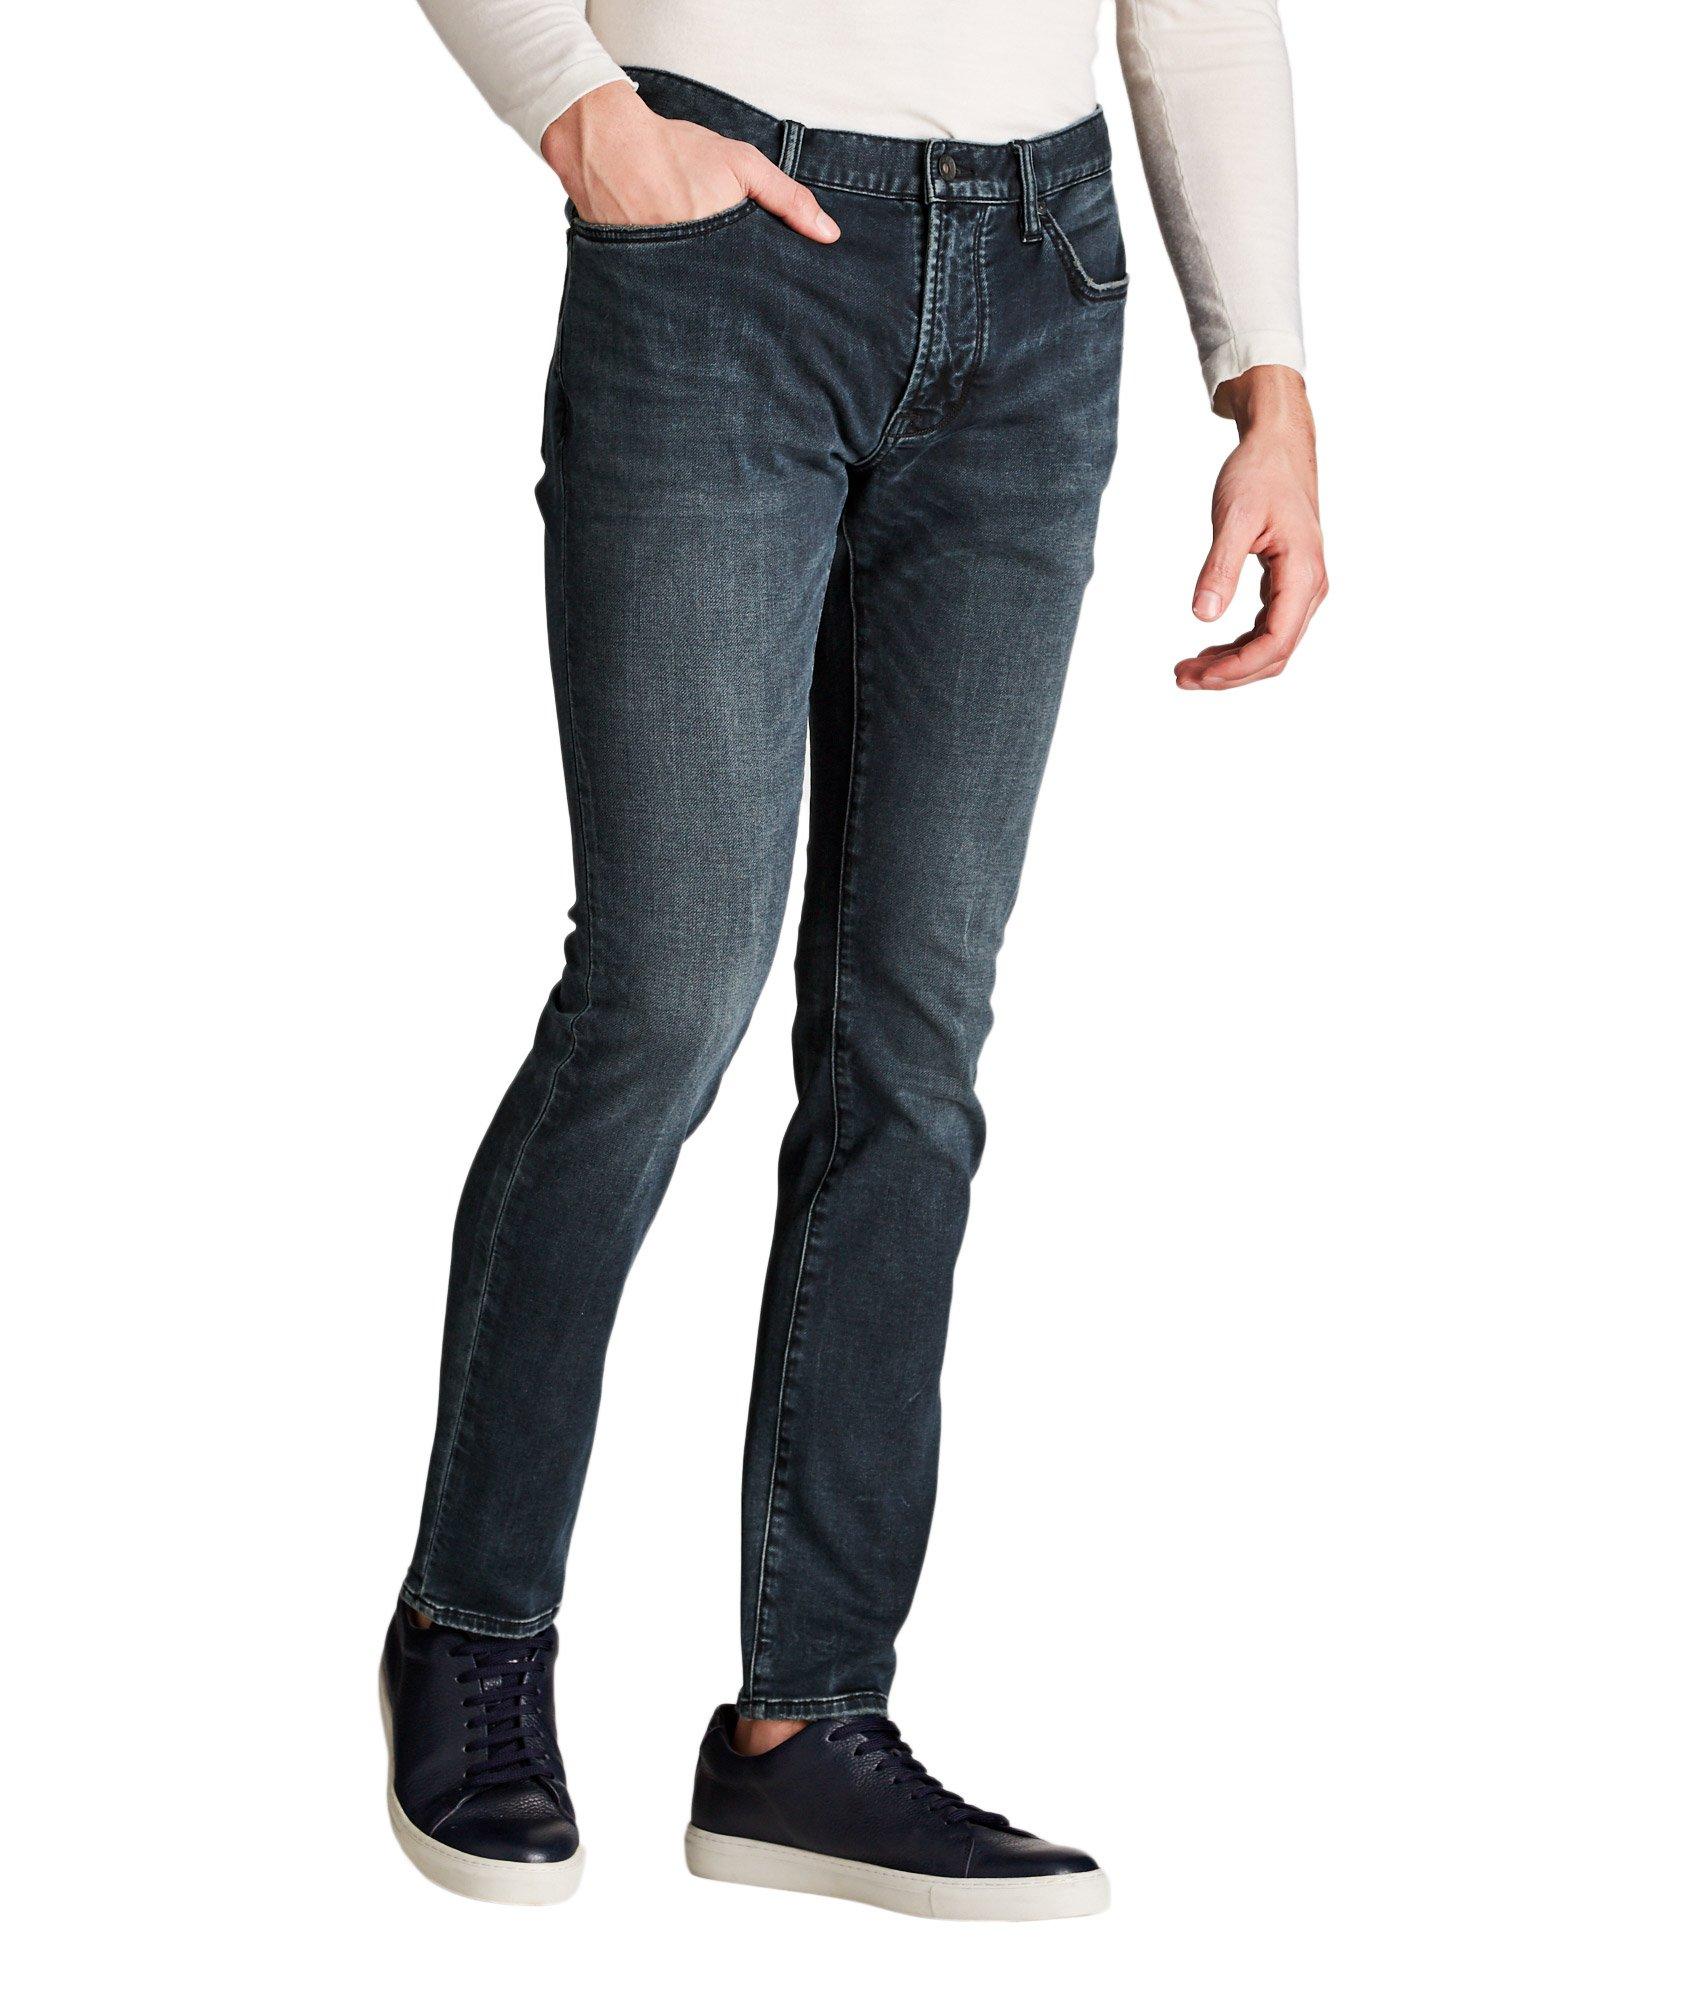 Wight Skinny Fit Jeans image 0